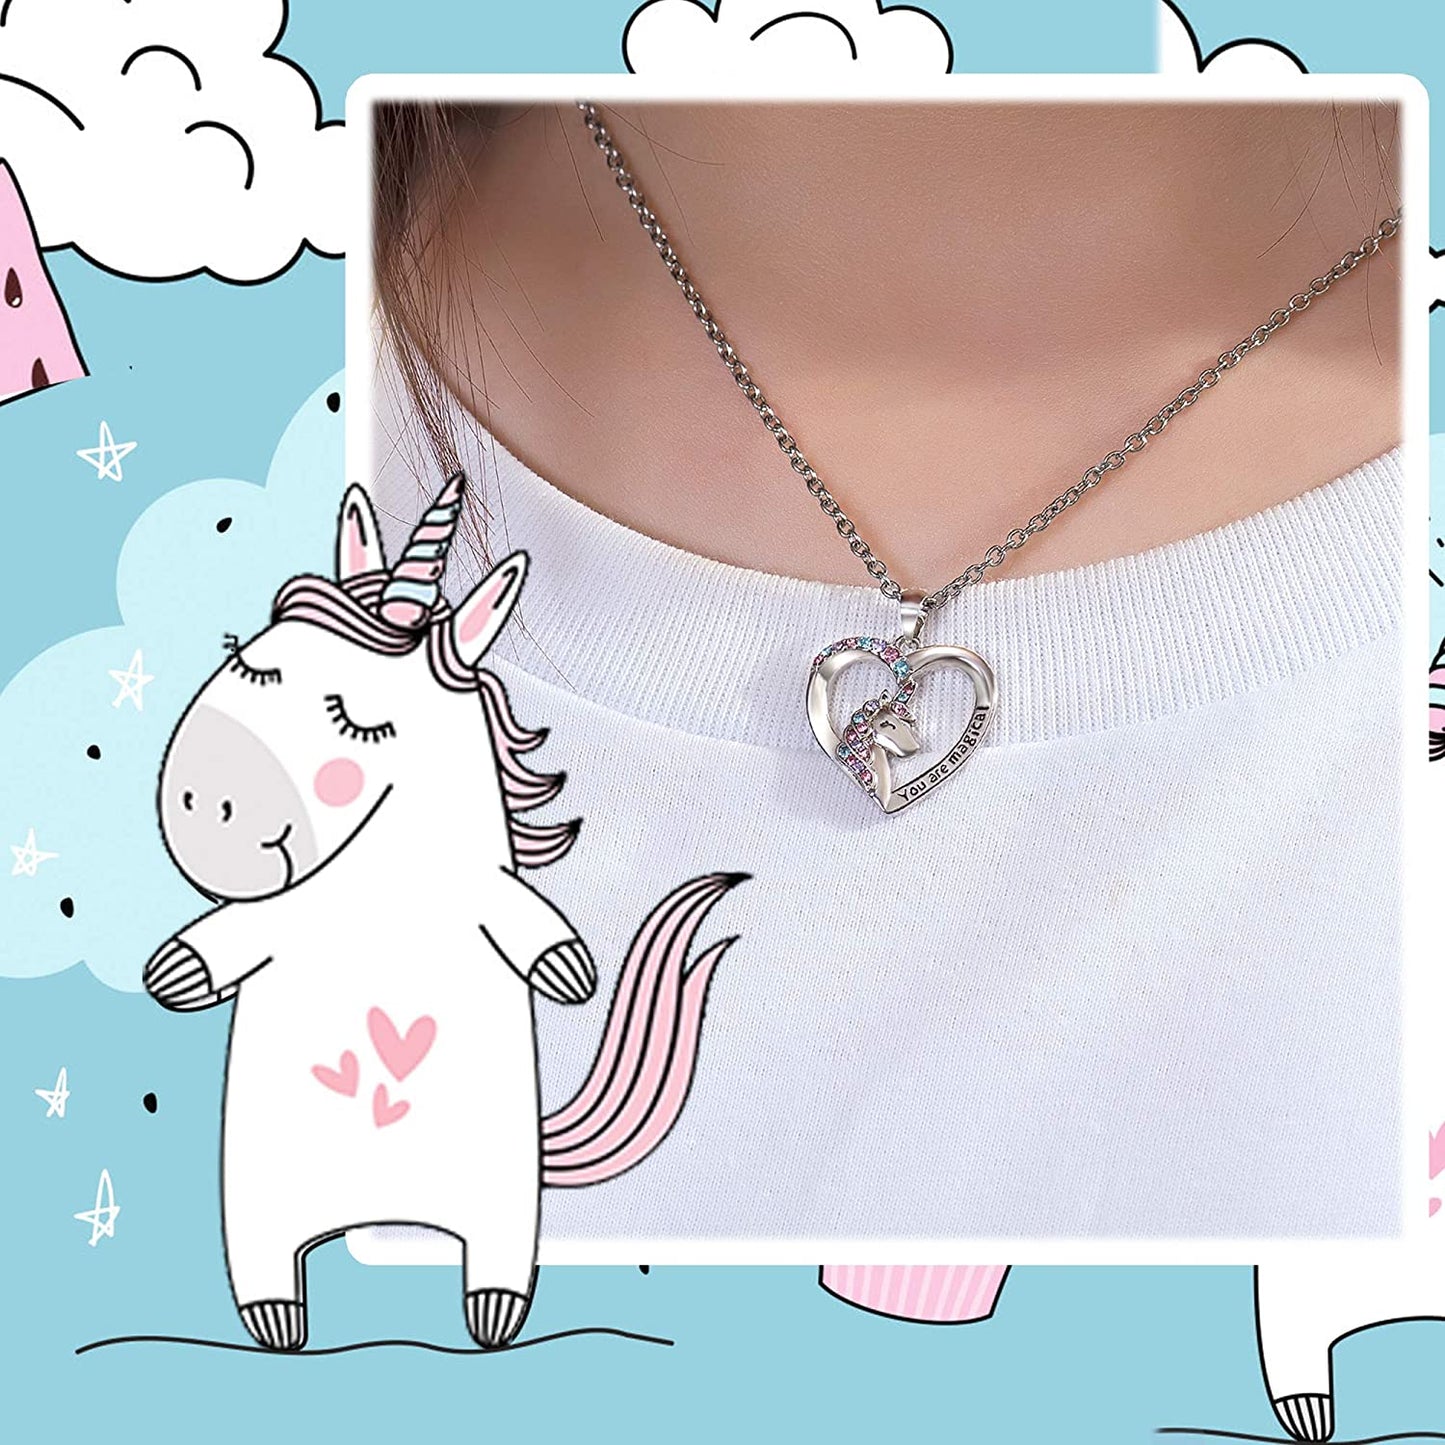 Unicorn Necklace for Women Girls CZ Stone Heart Pendant Necklace with You Are Magical Message Christmas Birthday Party Jewelry Gift for Daughter Granddaughter Niece